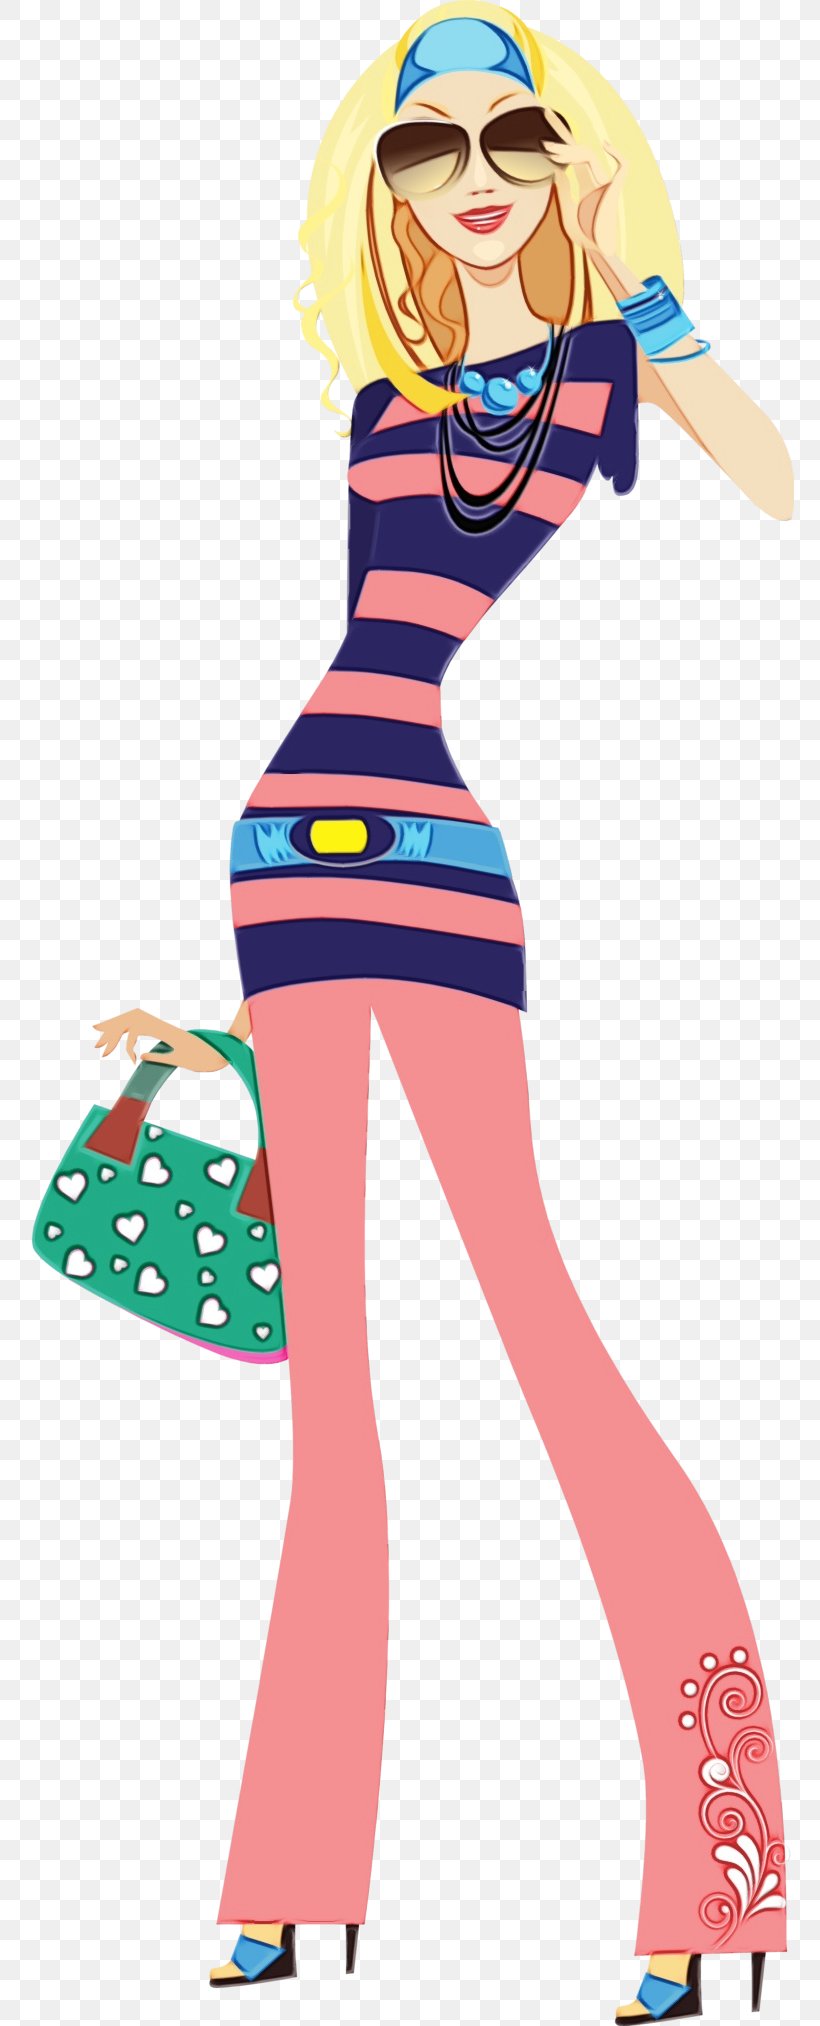 Clip art Portable Network Graphics Woman Shopping Image - woman png  download - 694*1200 - Free Transparent Woman png Download. - Clip Art  Library